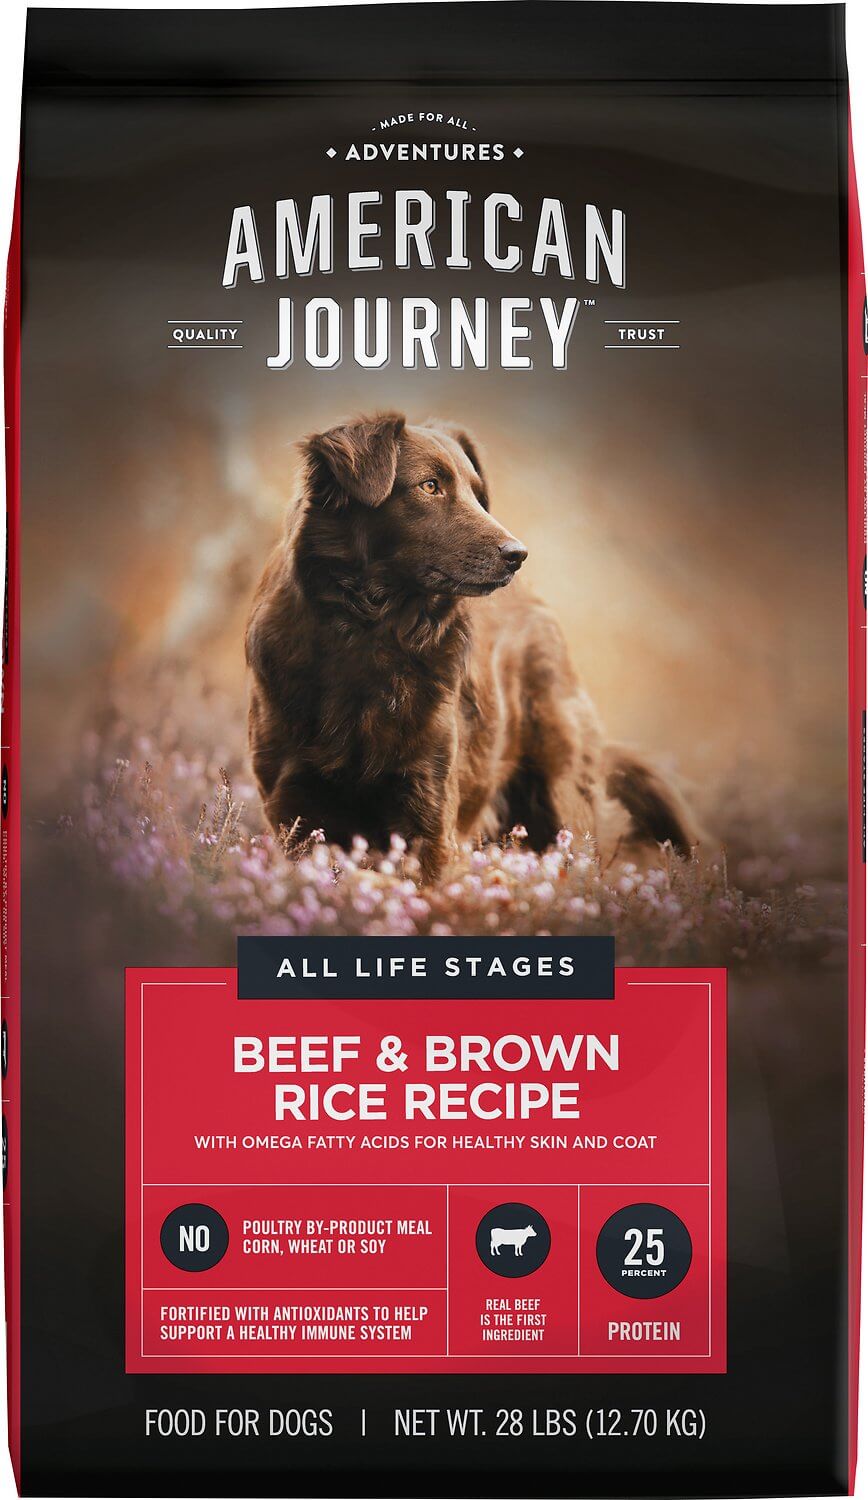 American Journey Dog Food | Review 